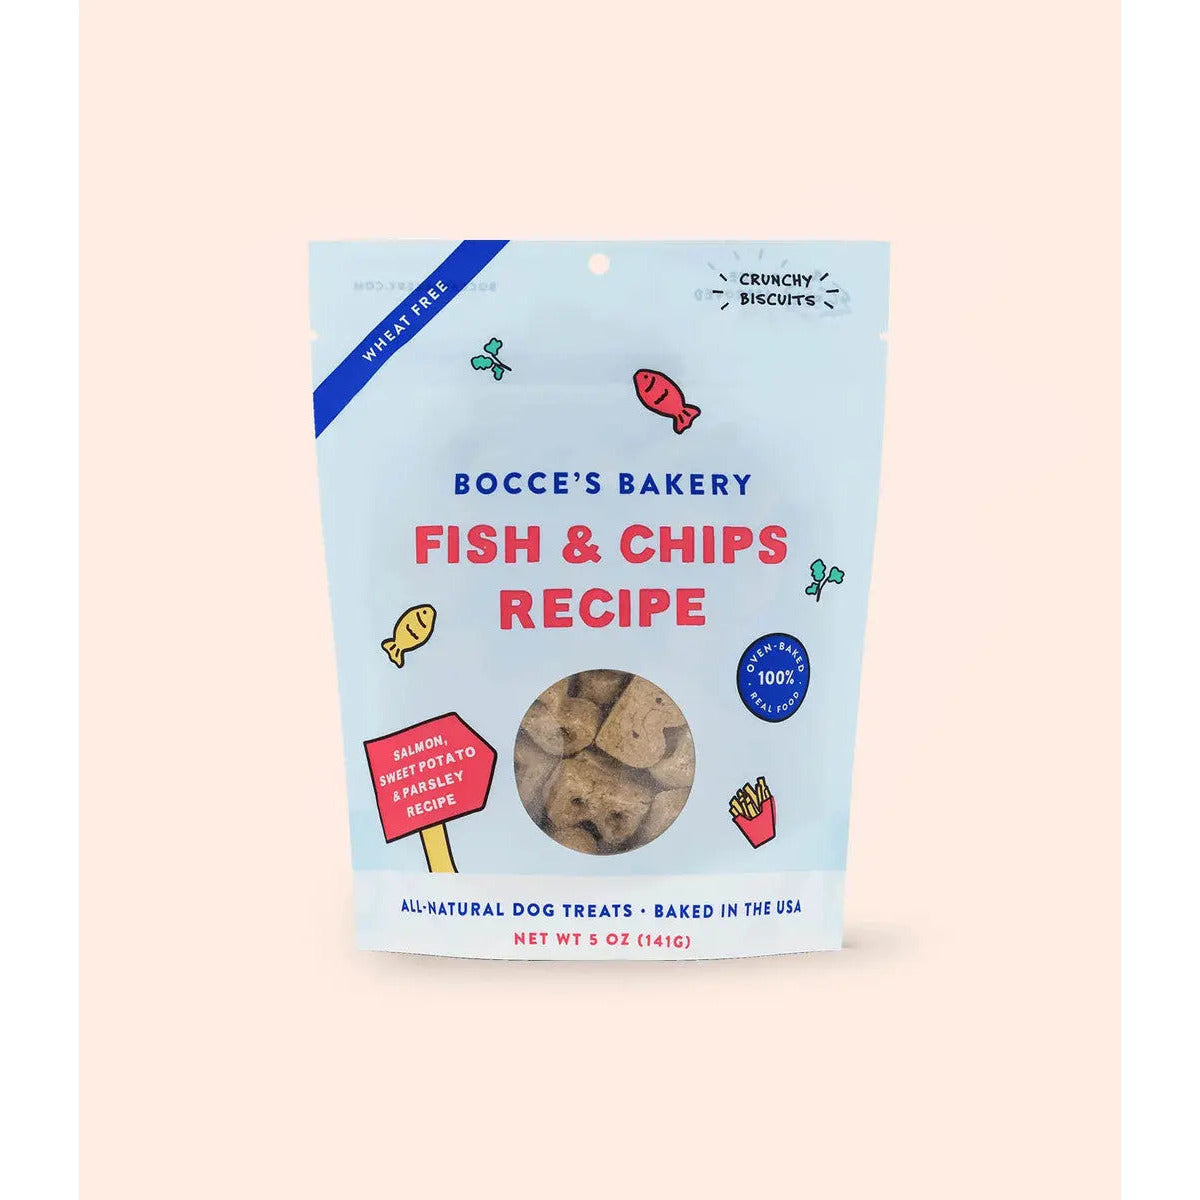 Bocce's Bakery Fish & Chips 5oz Biscuits Dog Treats Bocce's Bakery